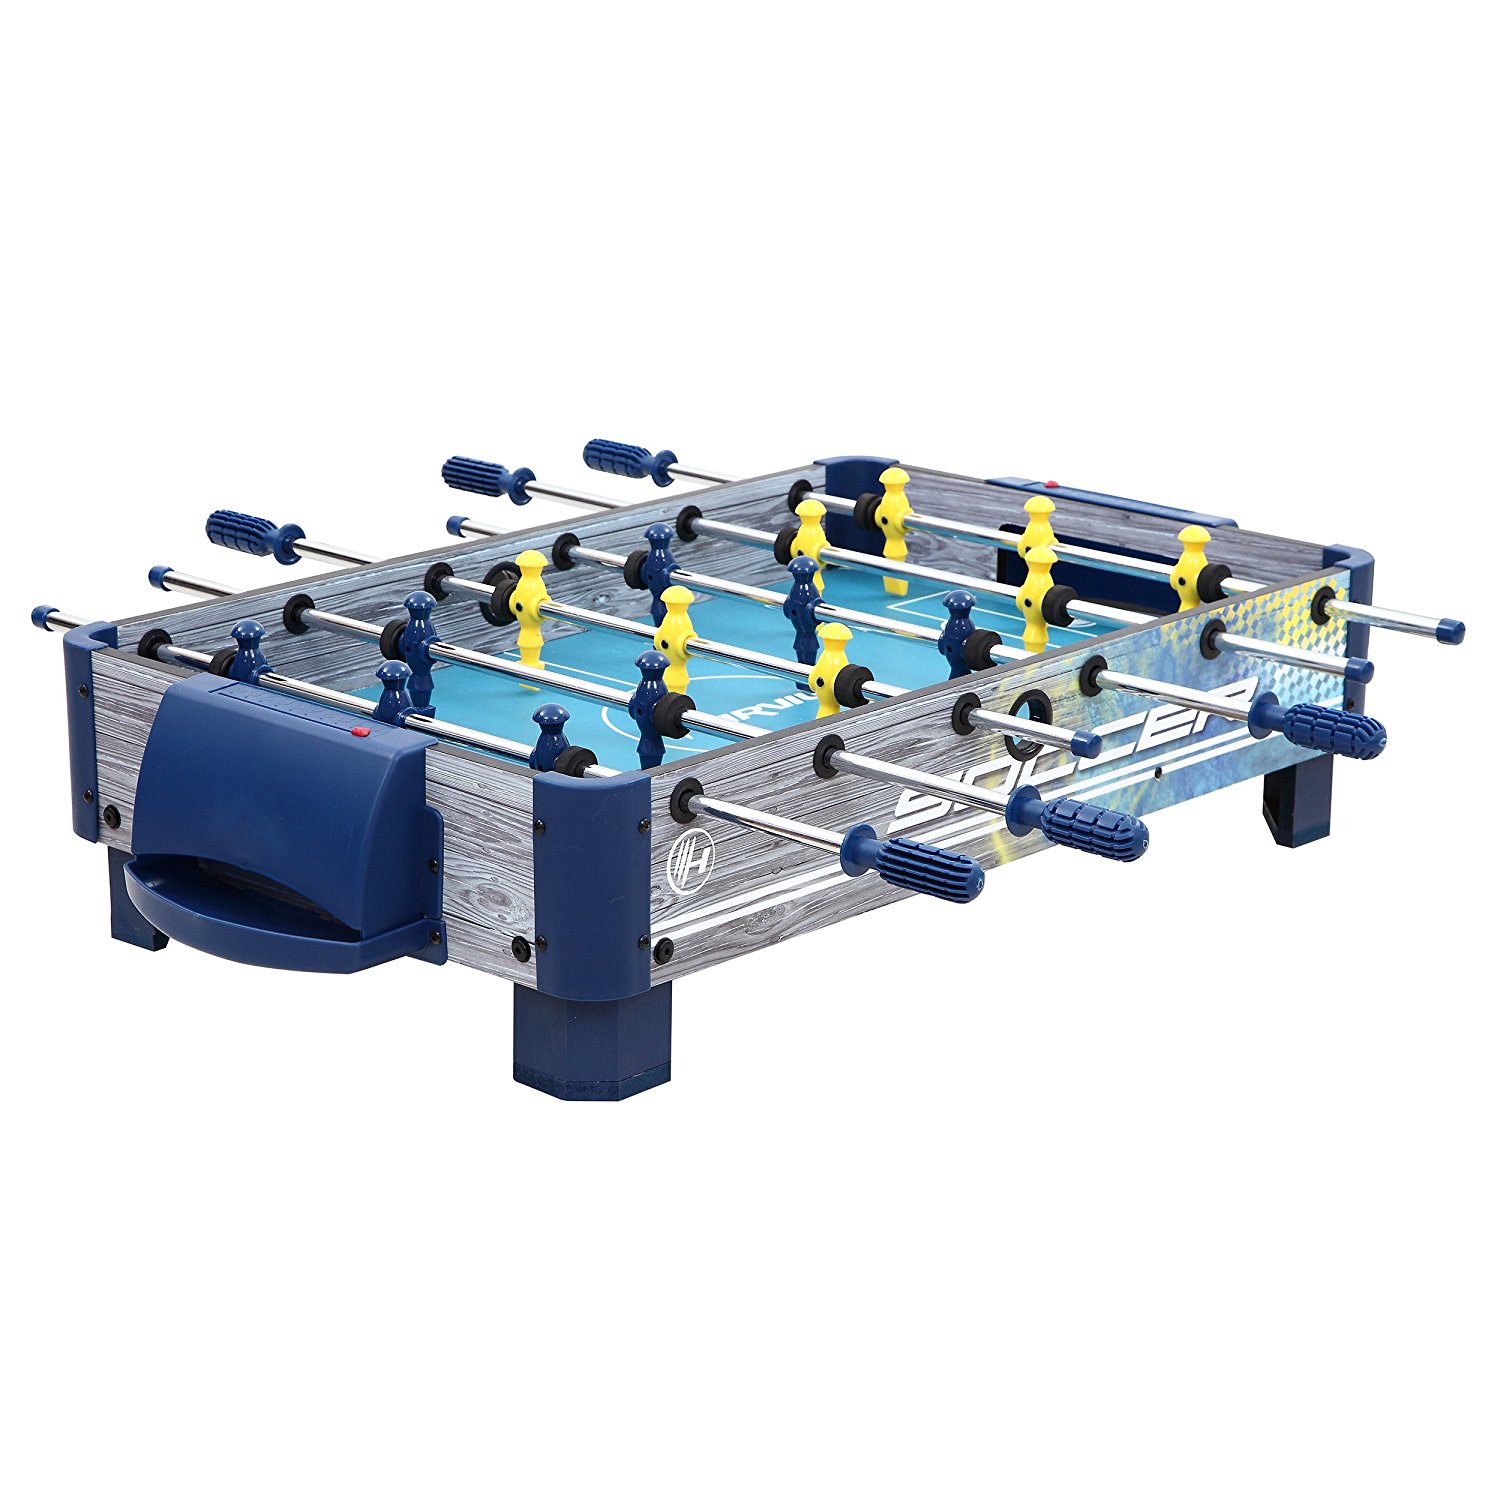 tabletop foosball table with silver handles by harvil image